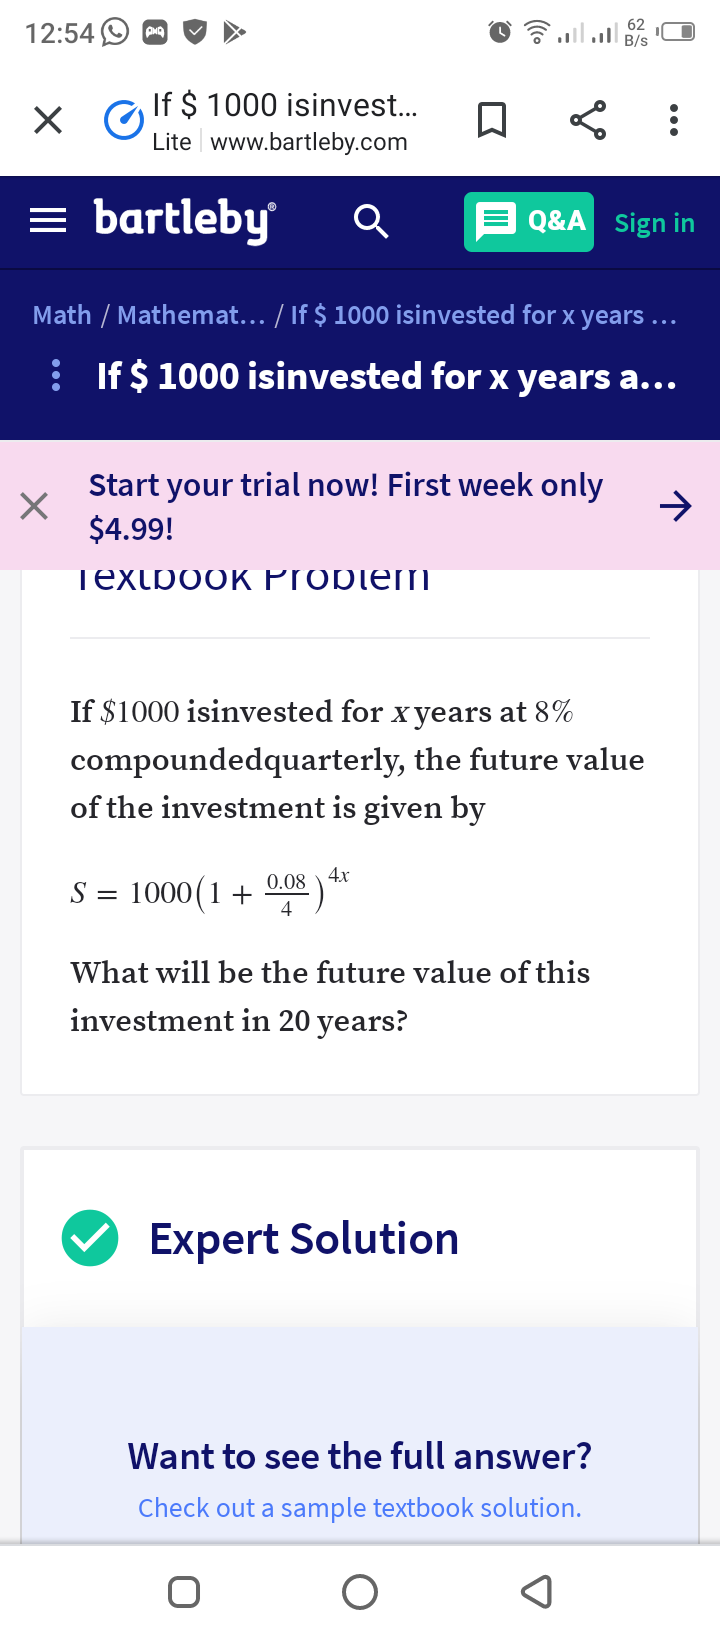 6 ll B/s
62
12:54
If $ 1000 isinvest..
Lite www.bartleby.com
= bartleby
E Q&A sign in
Math / Mathemat... / If $ 1000 isinvested for x years ...
: If$ 1000 isinvested for x years a...
Start your trial now! First week only
$4.99!
->
TextpooK Proplem
If $1000 isinvested for x years at 8%
compoundedquarterly, the future value
of the investment is given by
4x
0.08
1000 (1+
S =
4
What will be the future value of this
investment in 20 years?
Expert Solution
Want to see the full answer?
Check out a sample textbook solution.
...
